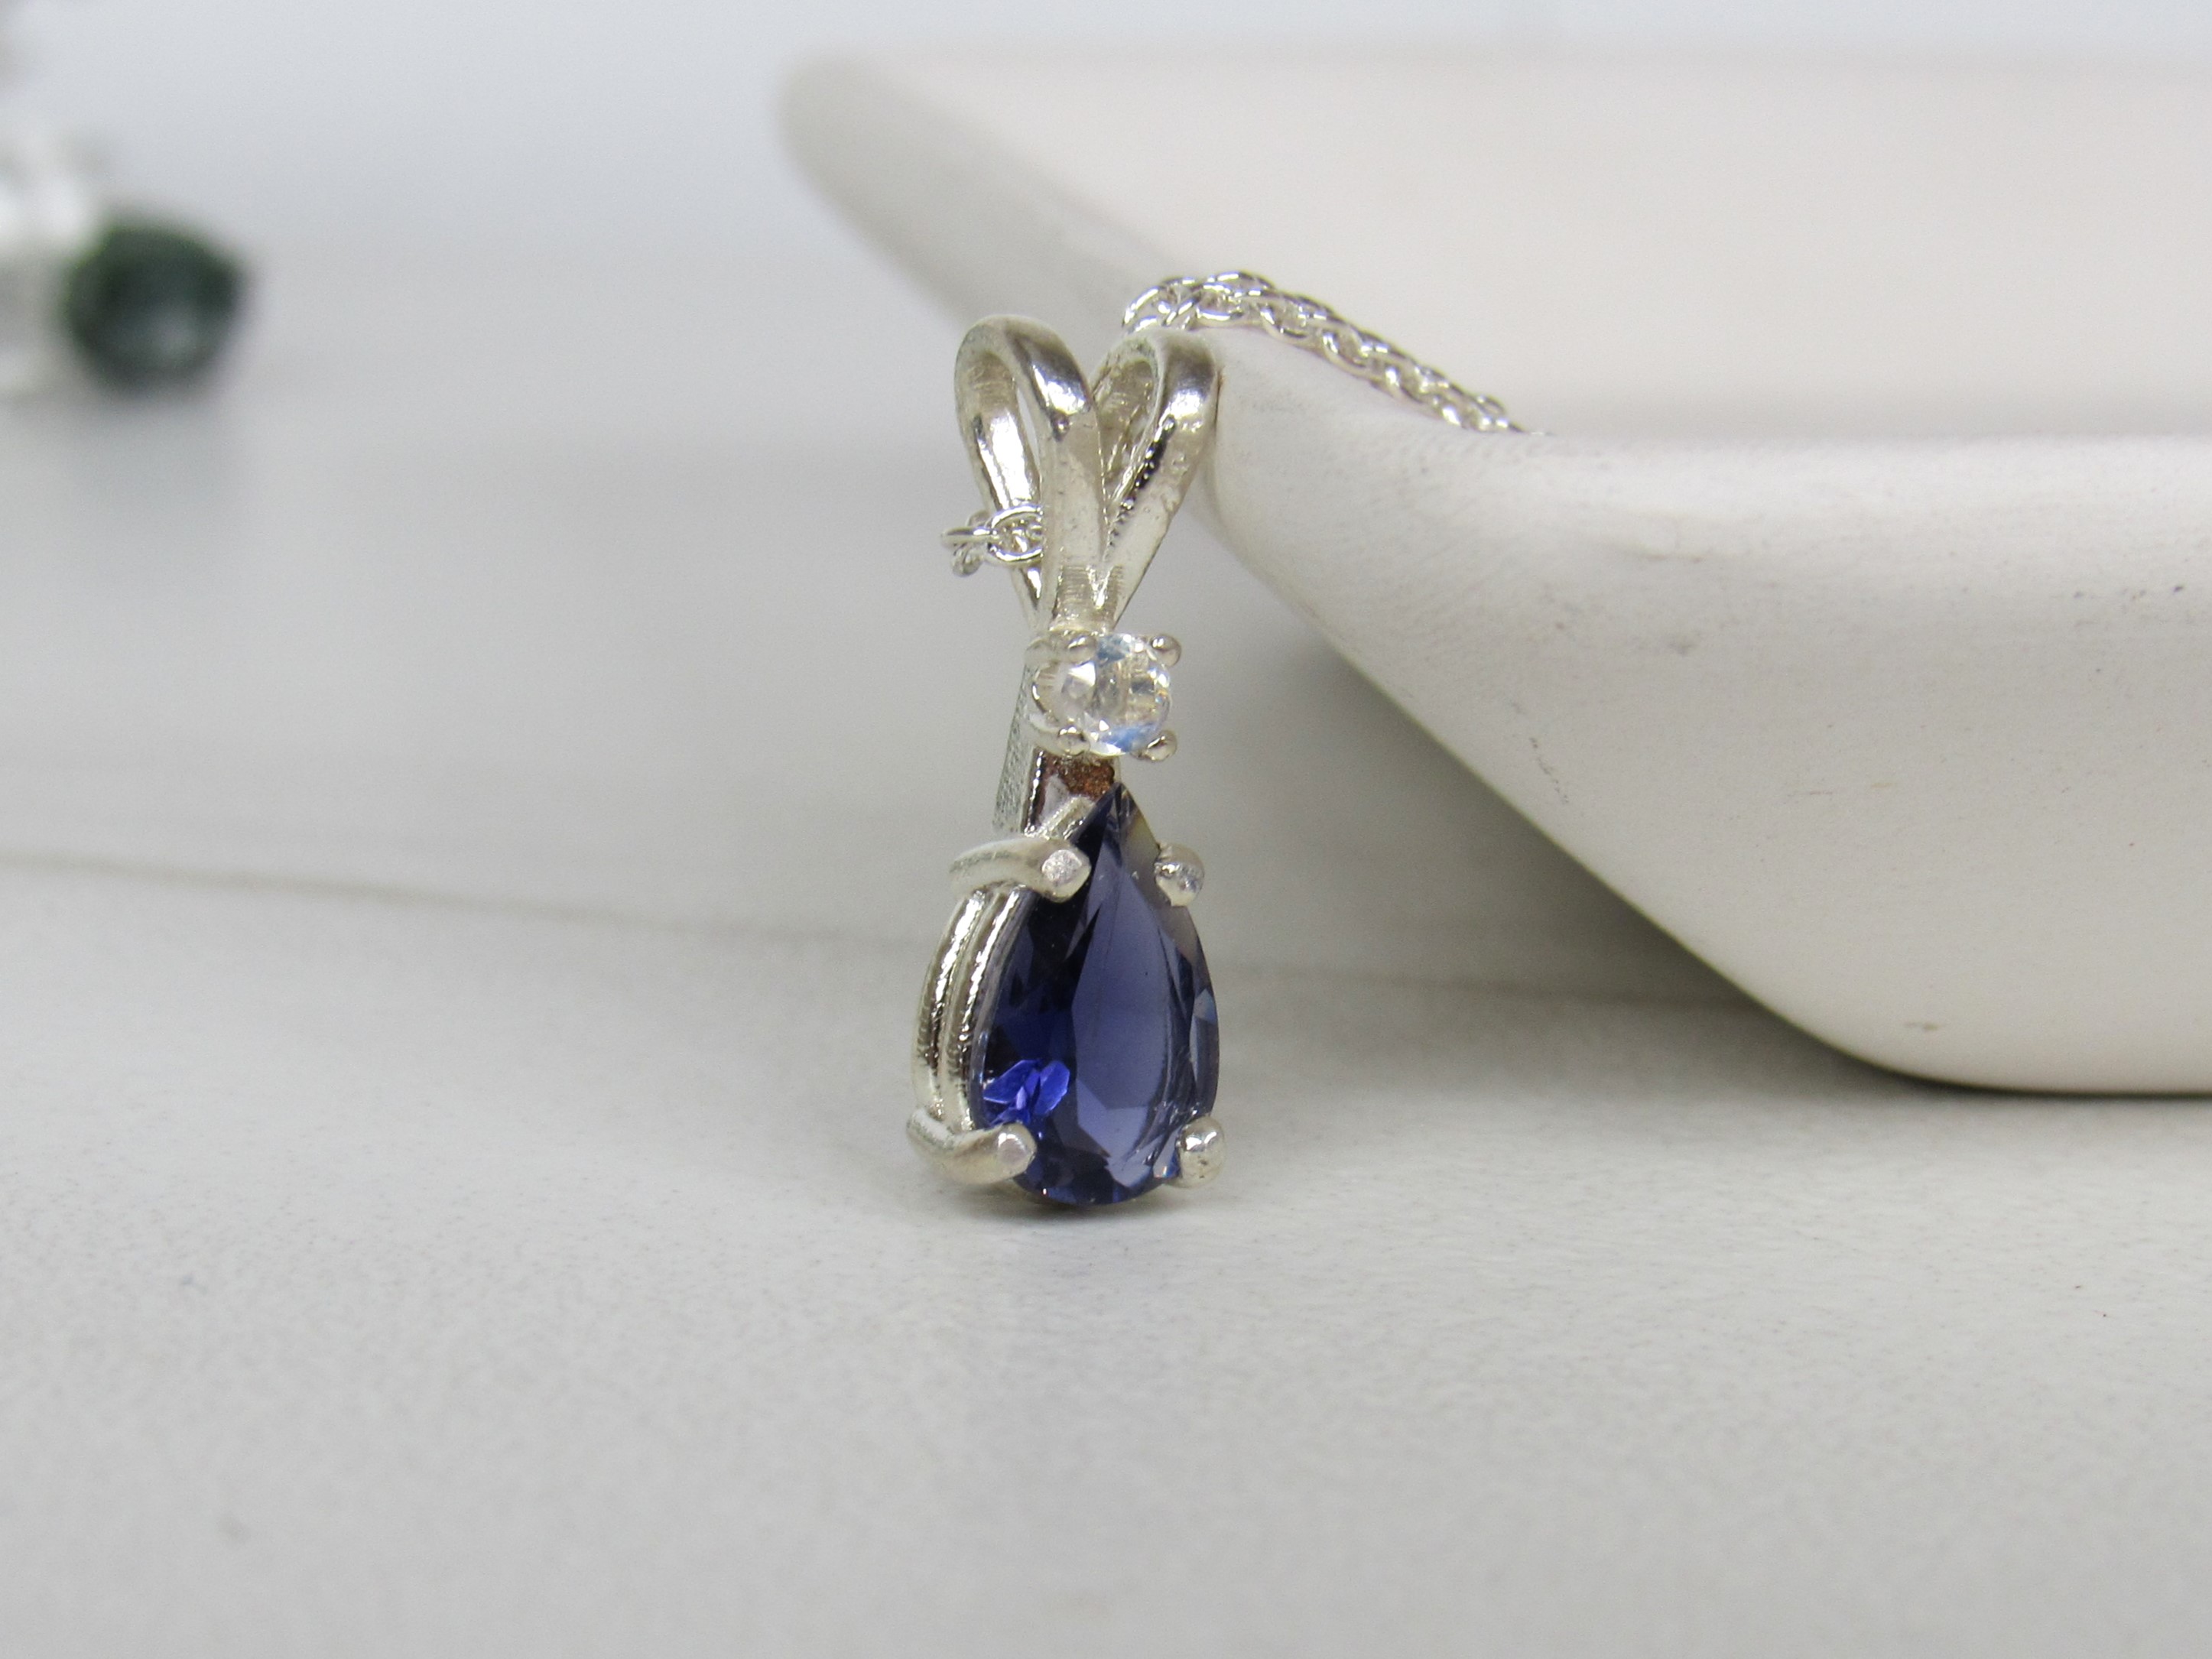 Iolite and Moonstone Necklace in Sterling Silver